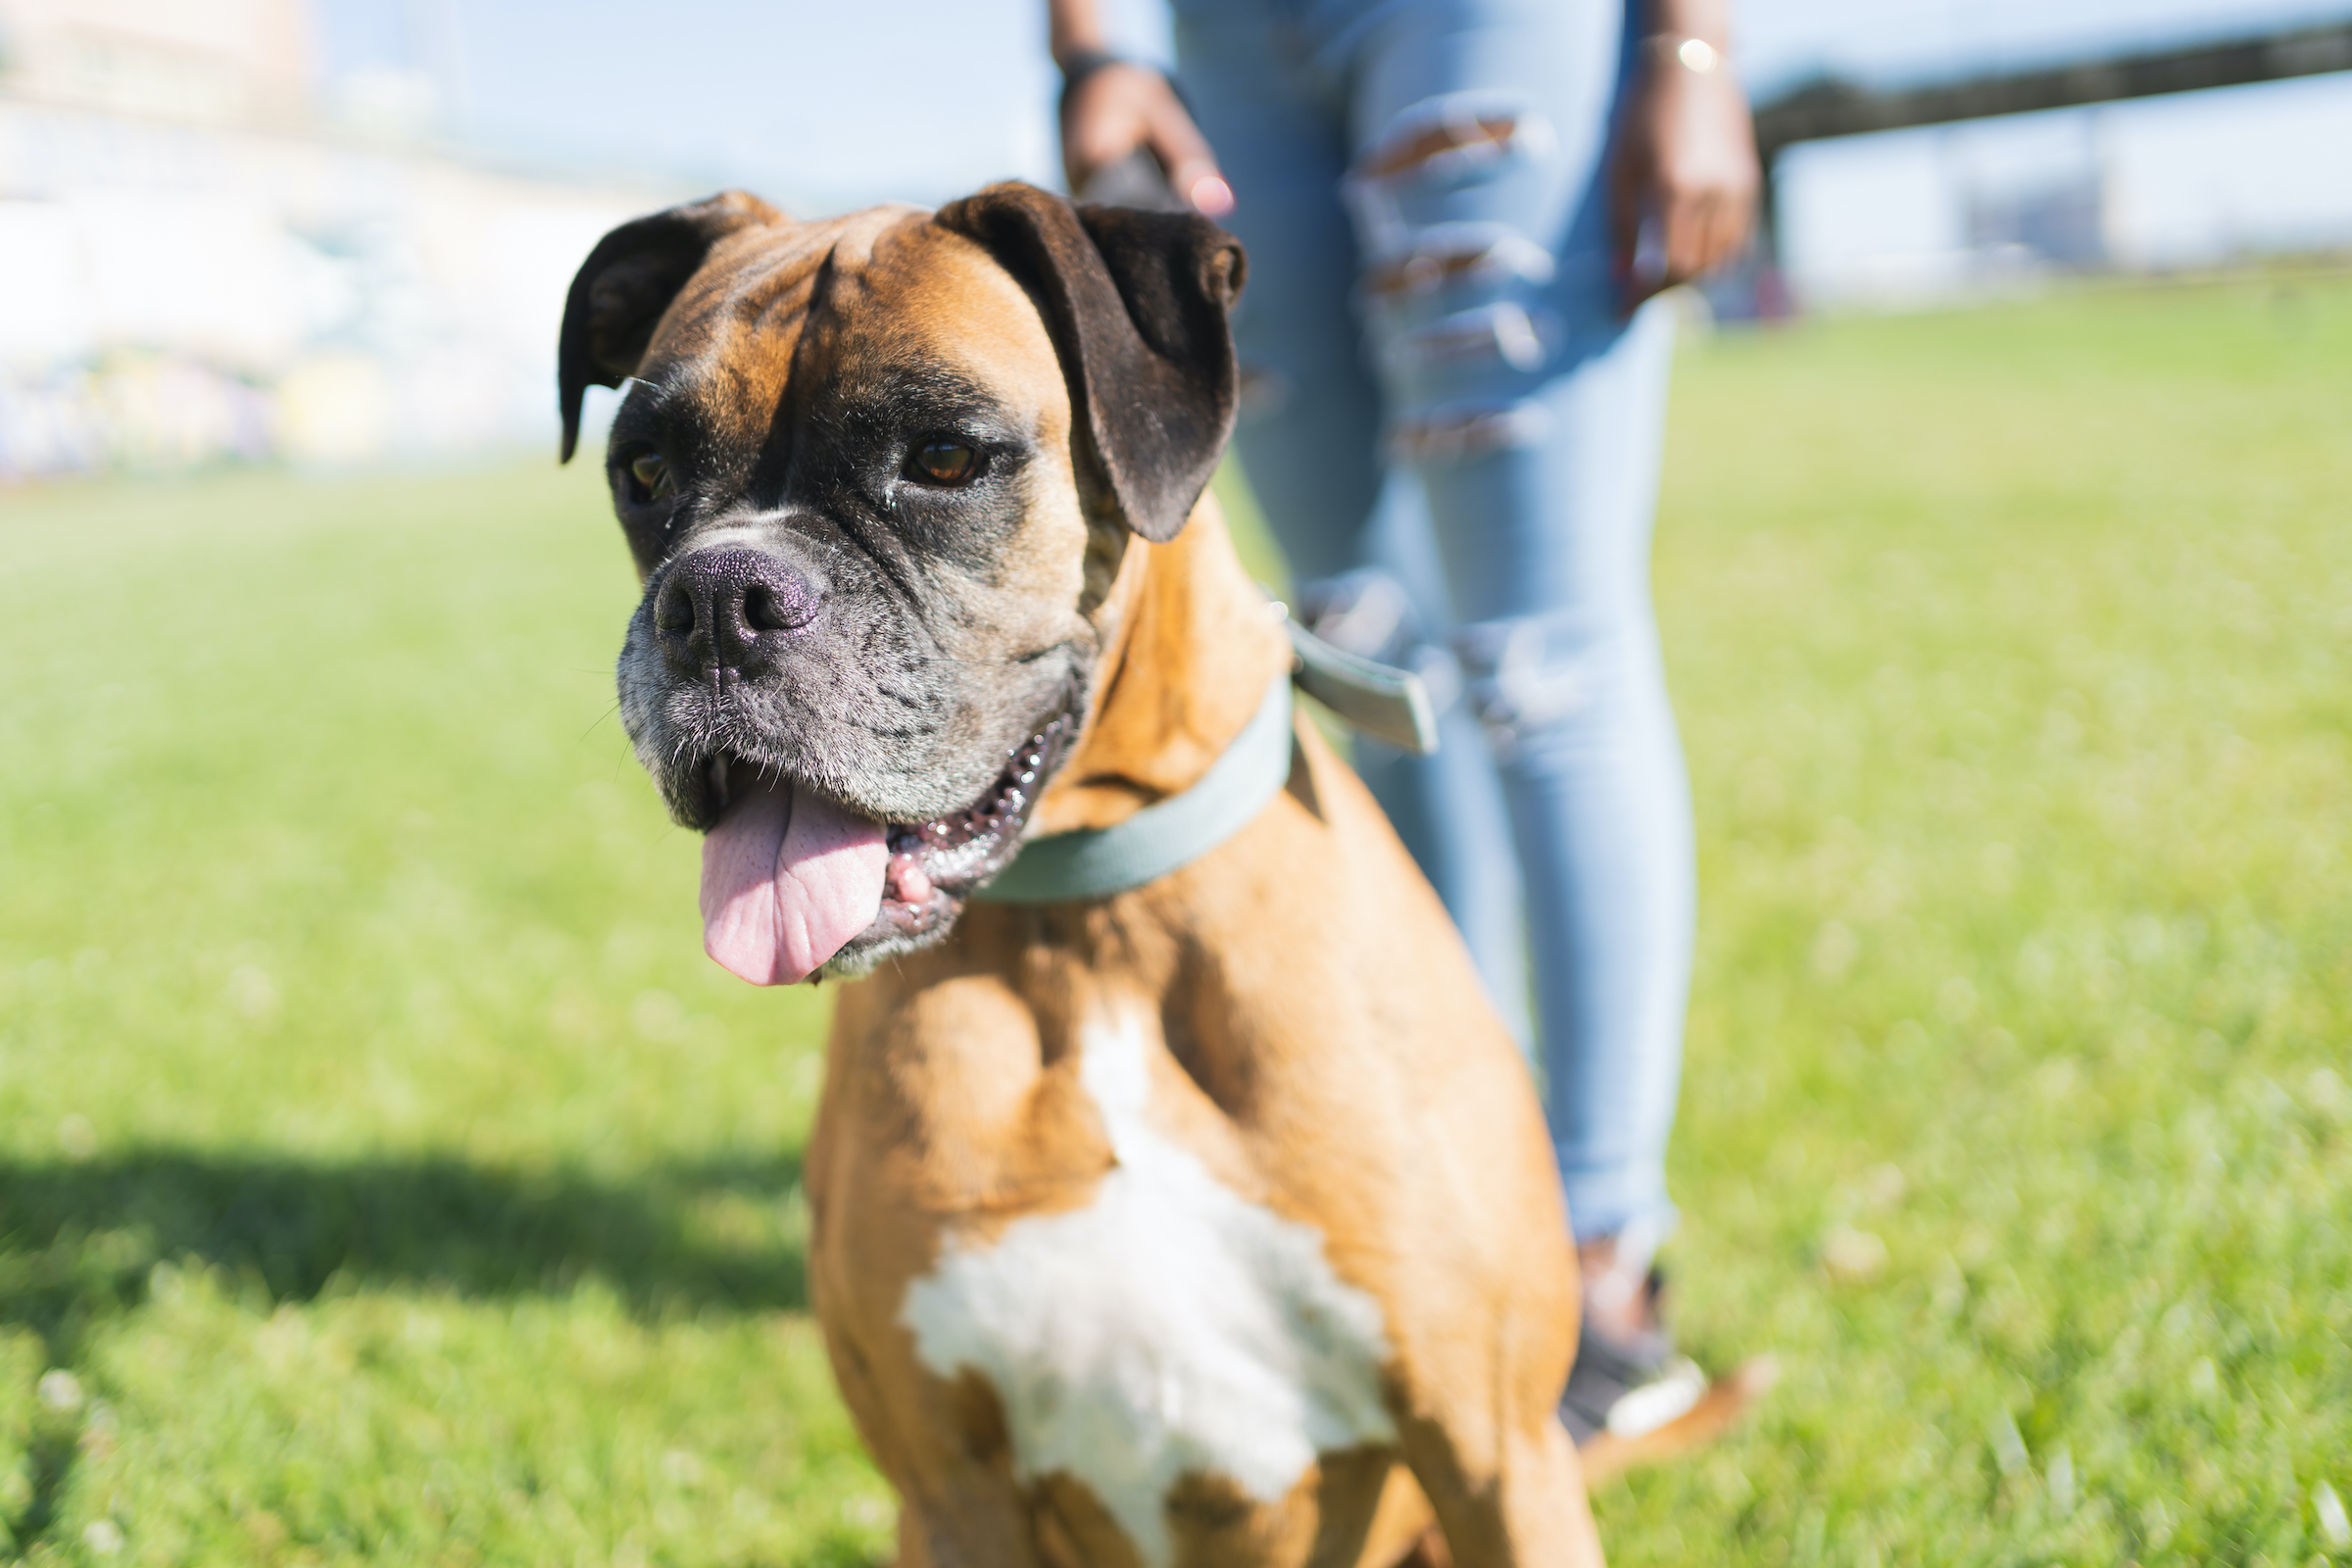 A Boxer dog stands with his tongue out while his owner holds his leash